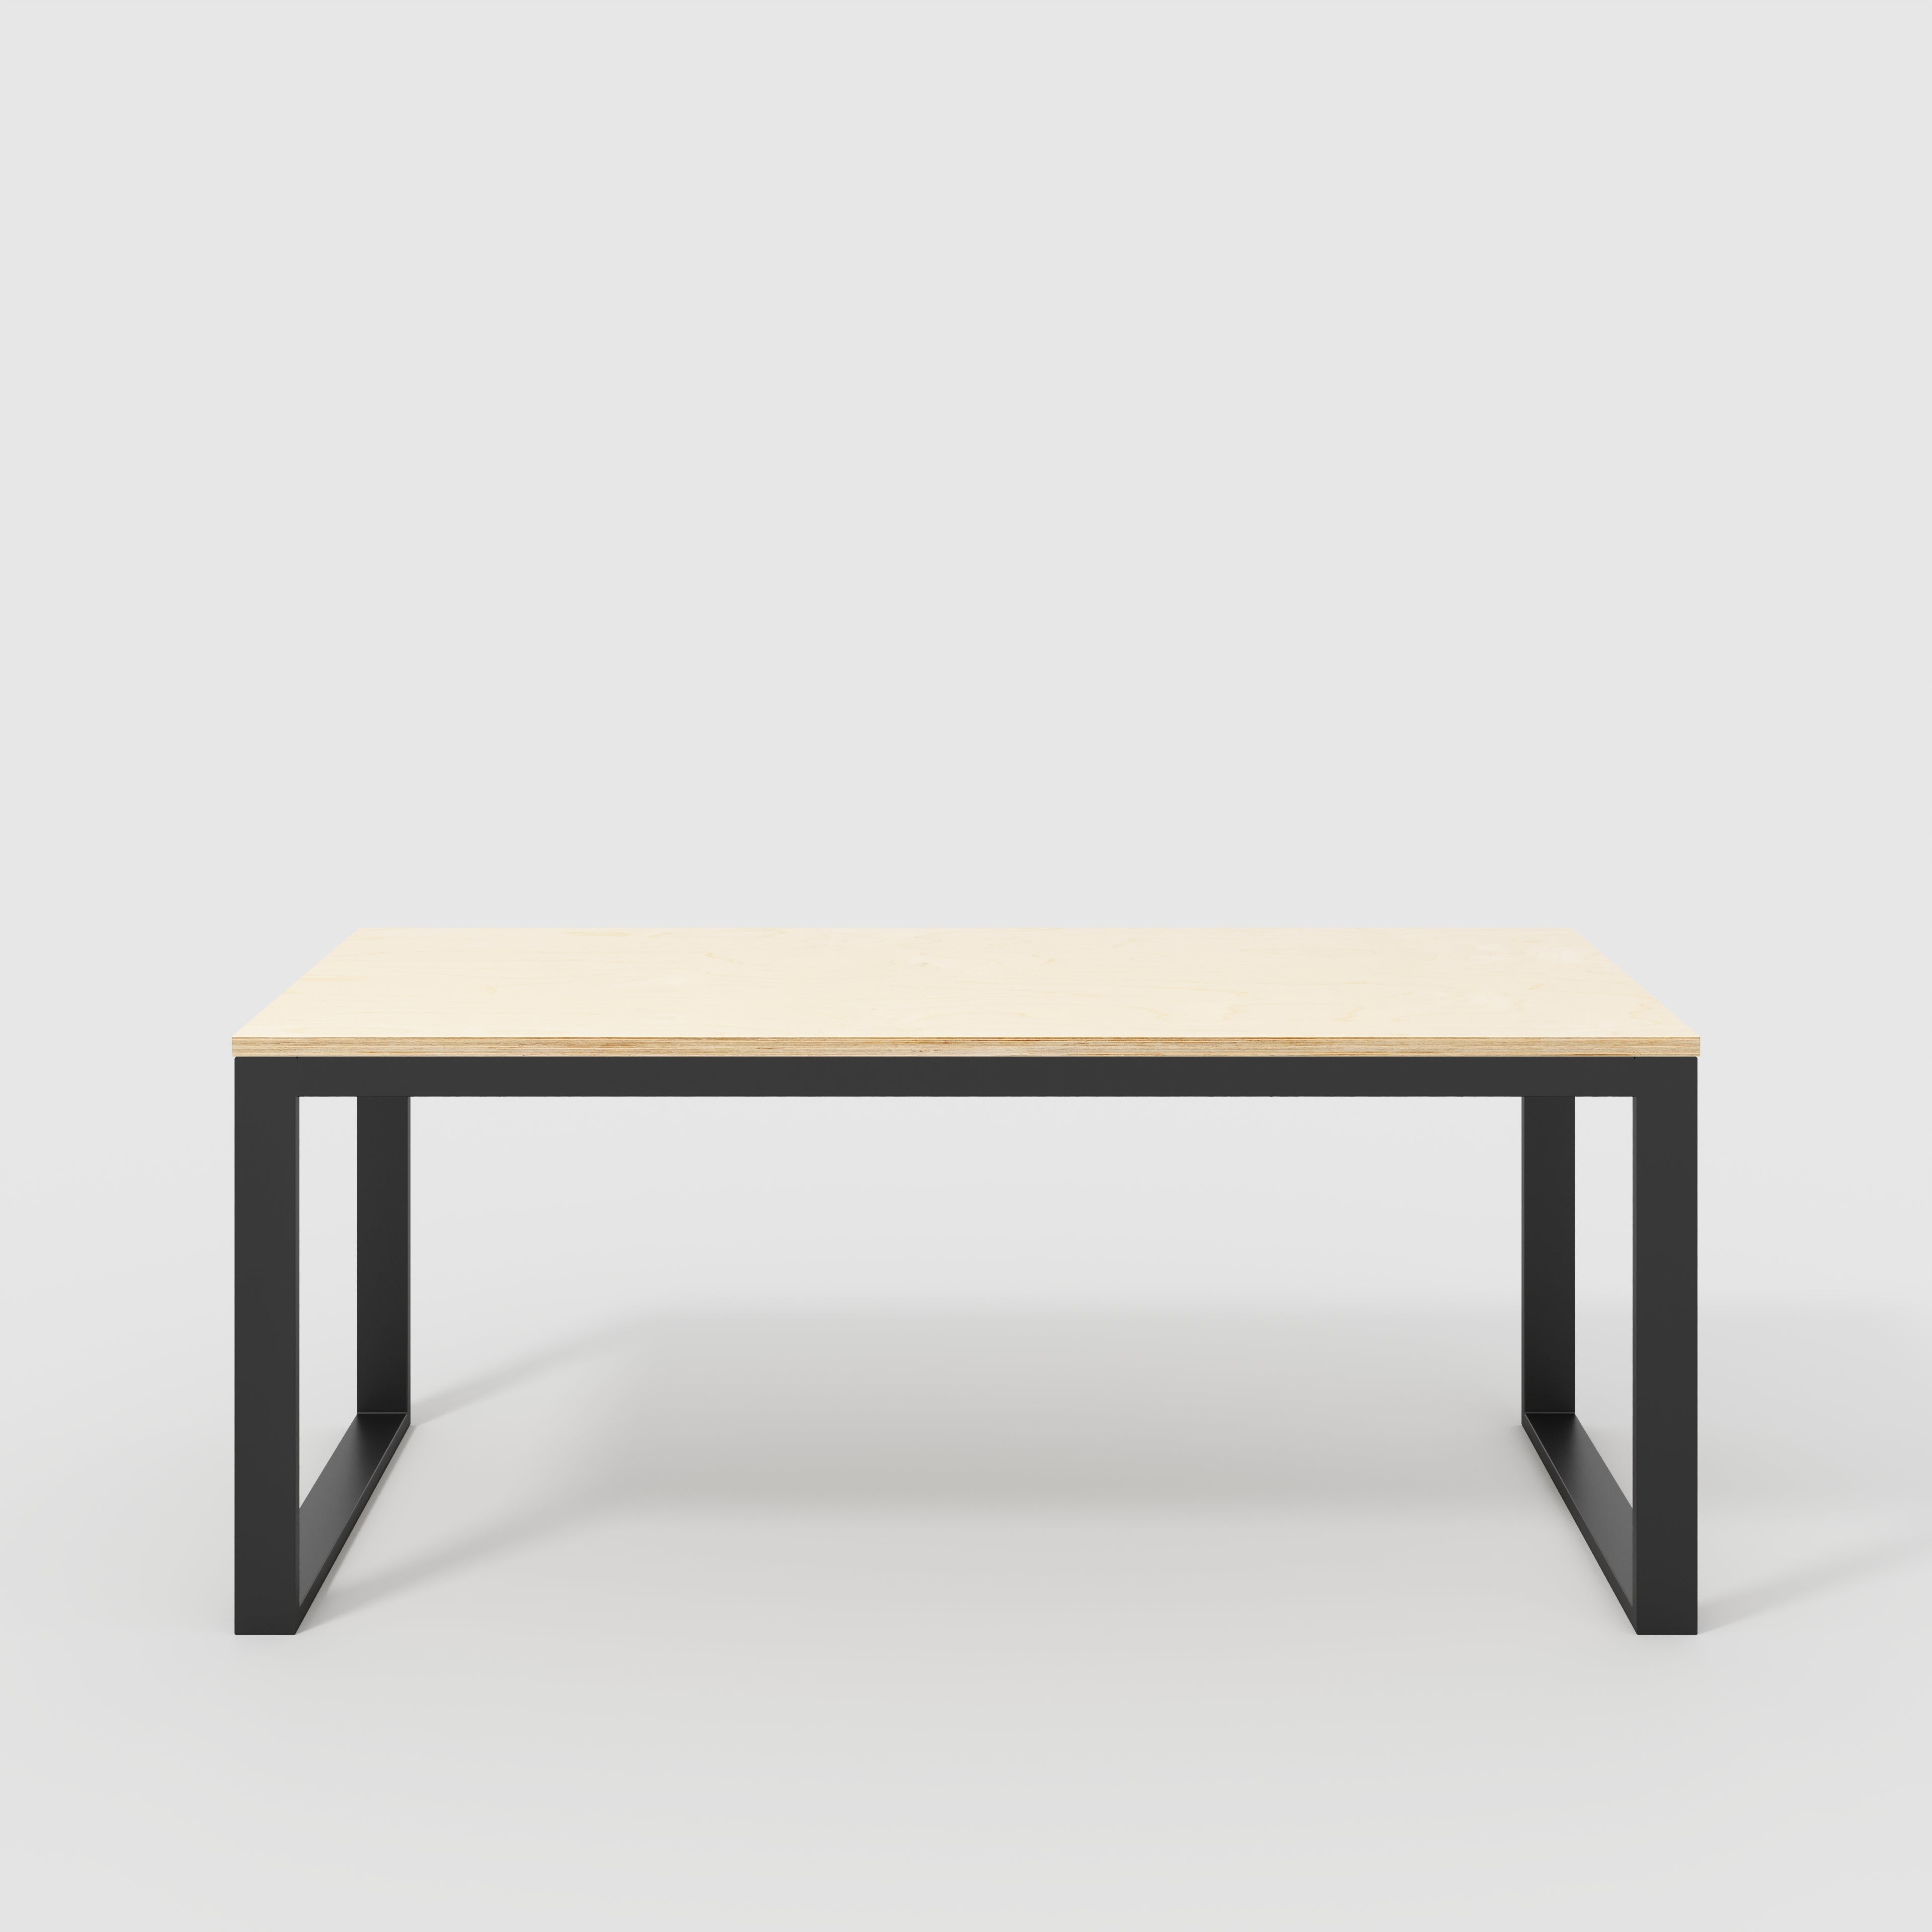 Table with Black Industrial Frame - Plywood Birch - 1800(w) x 745(d) x 735(h)